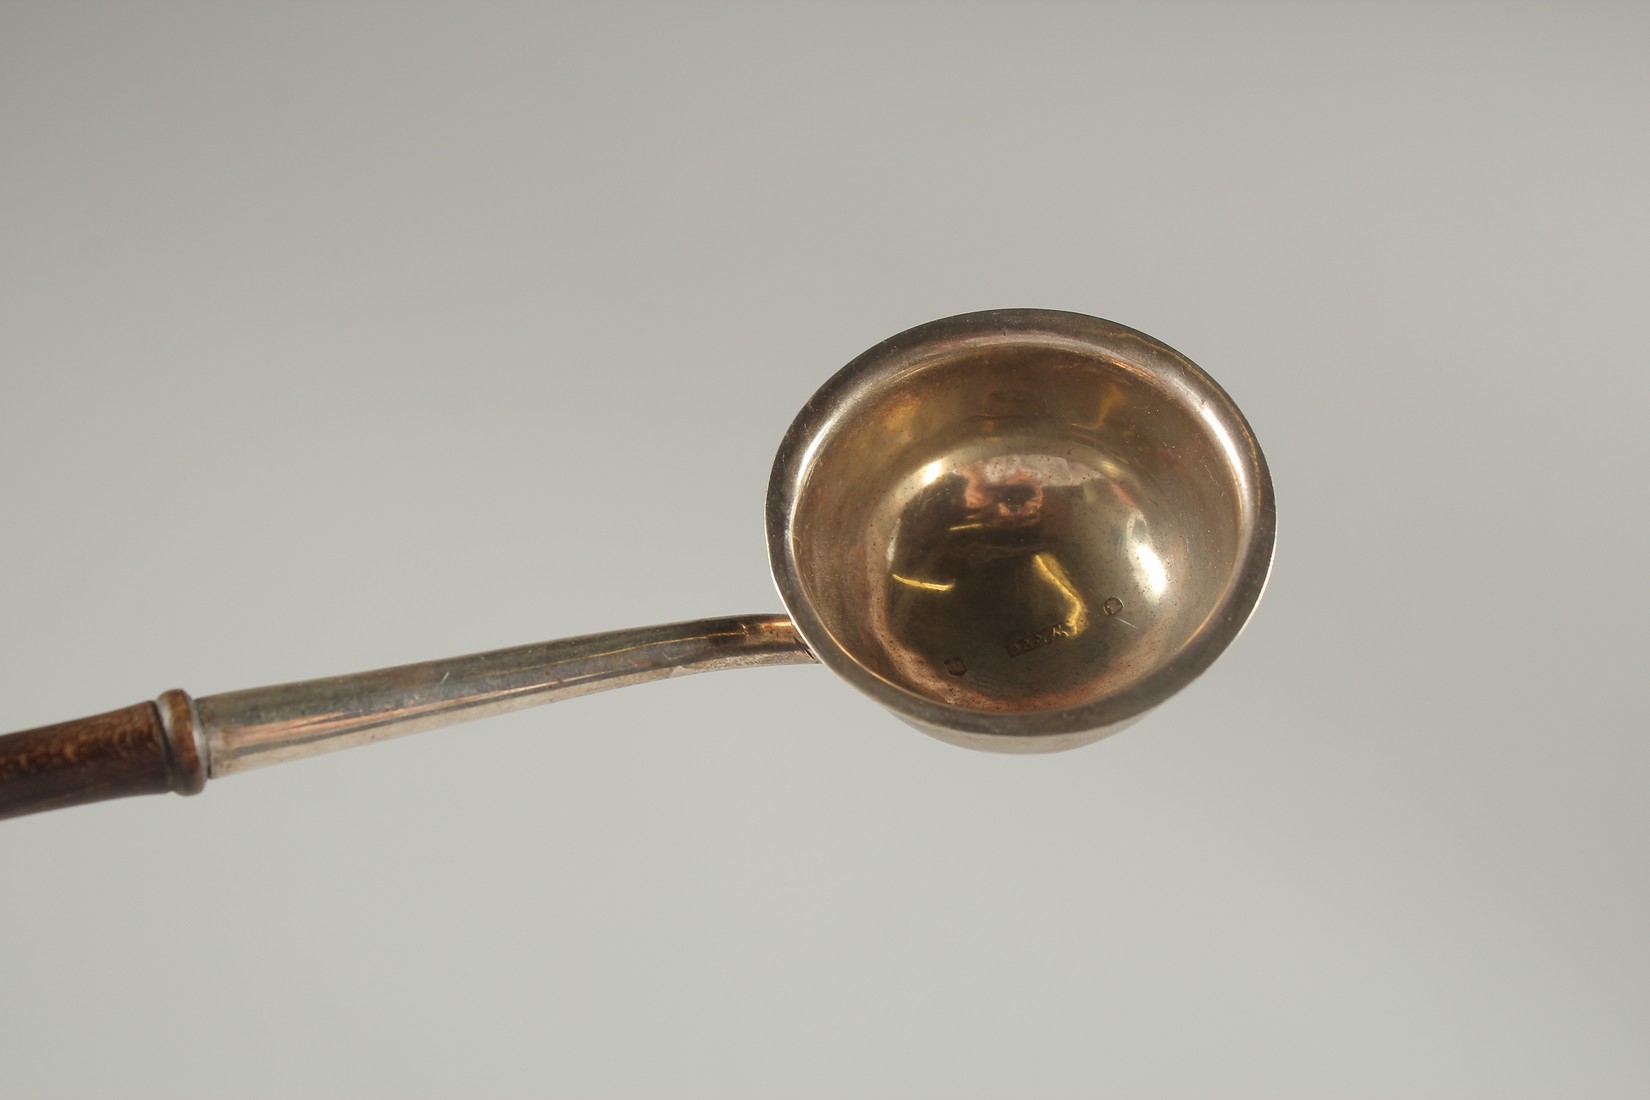 A GEORGE III SILVER TODY LADLE with wooden handle. Edinburgh, circa. 1800. - Image 2 of 4